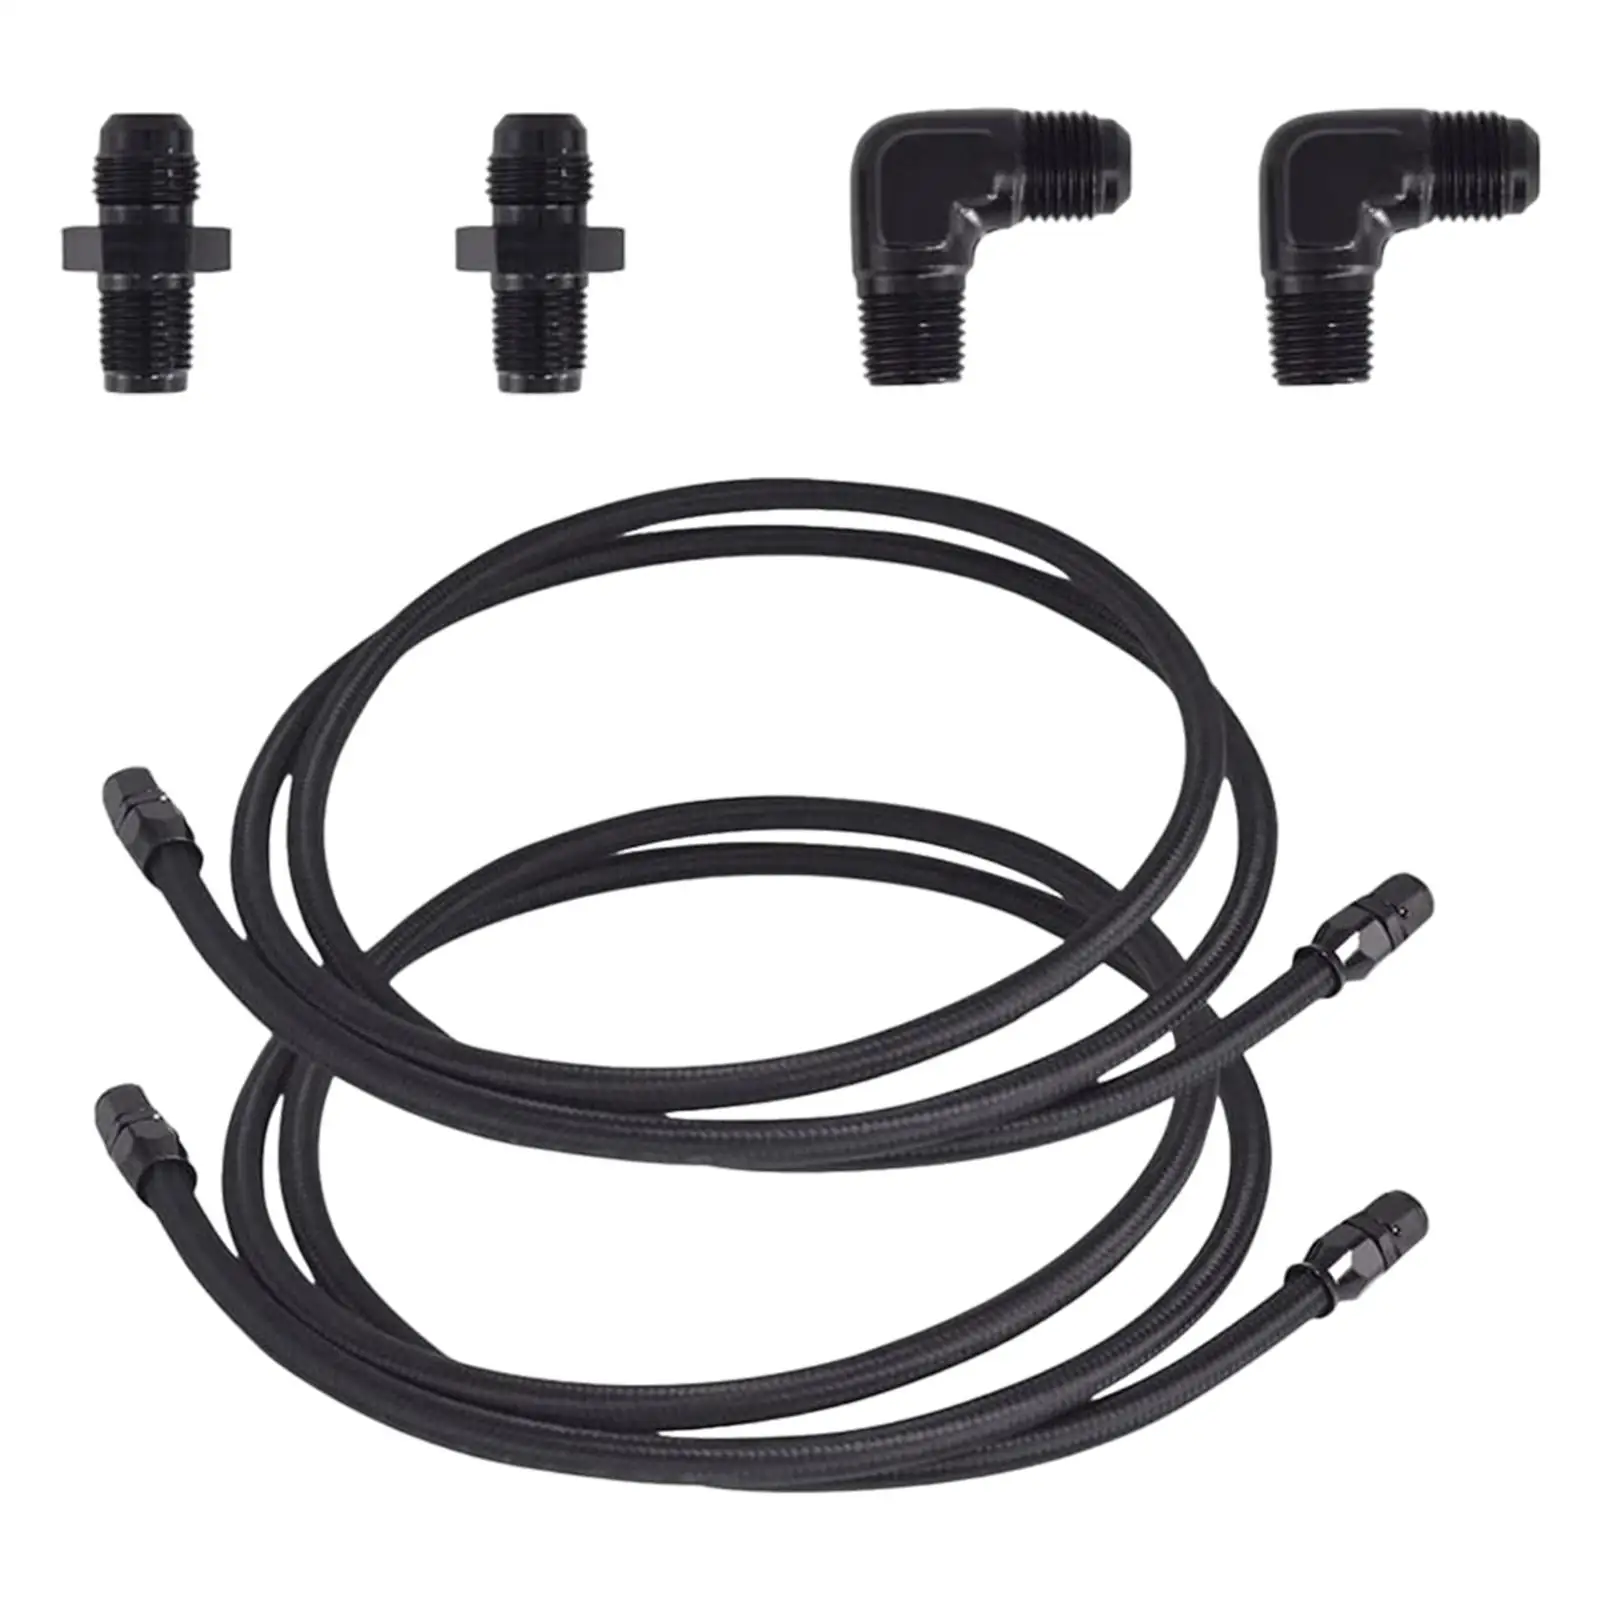 6AN PTFE Line Fitting Kit High Performance -1/4NPT 90 Degree Accessories